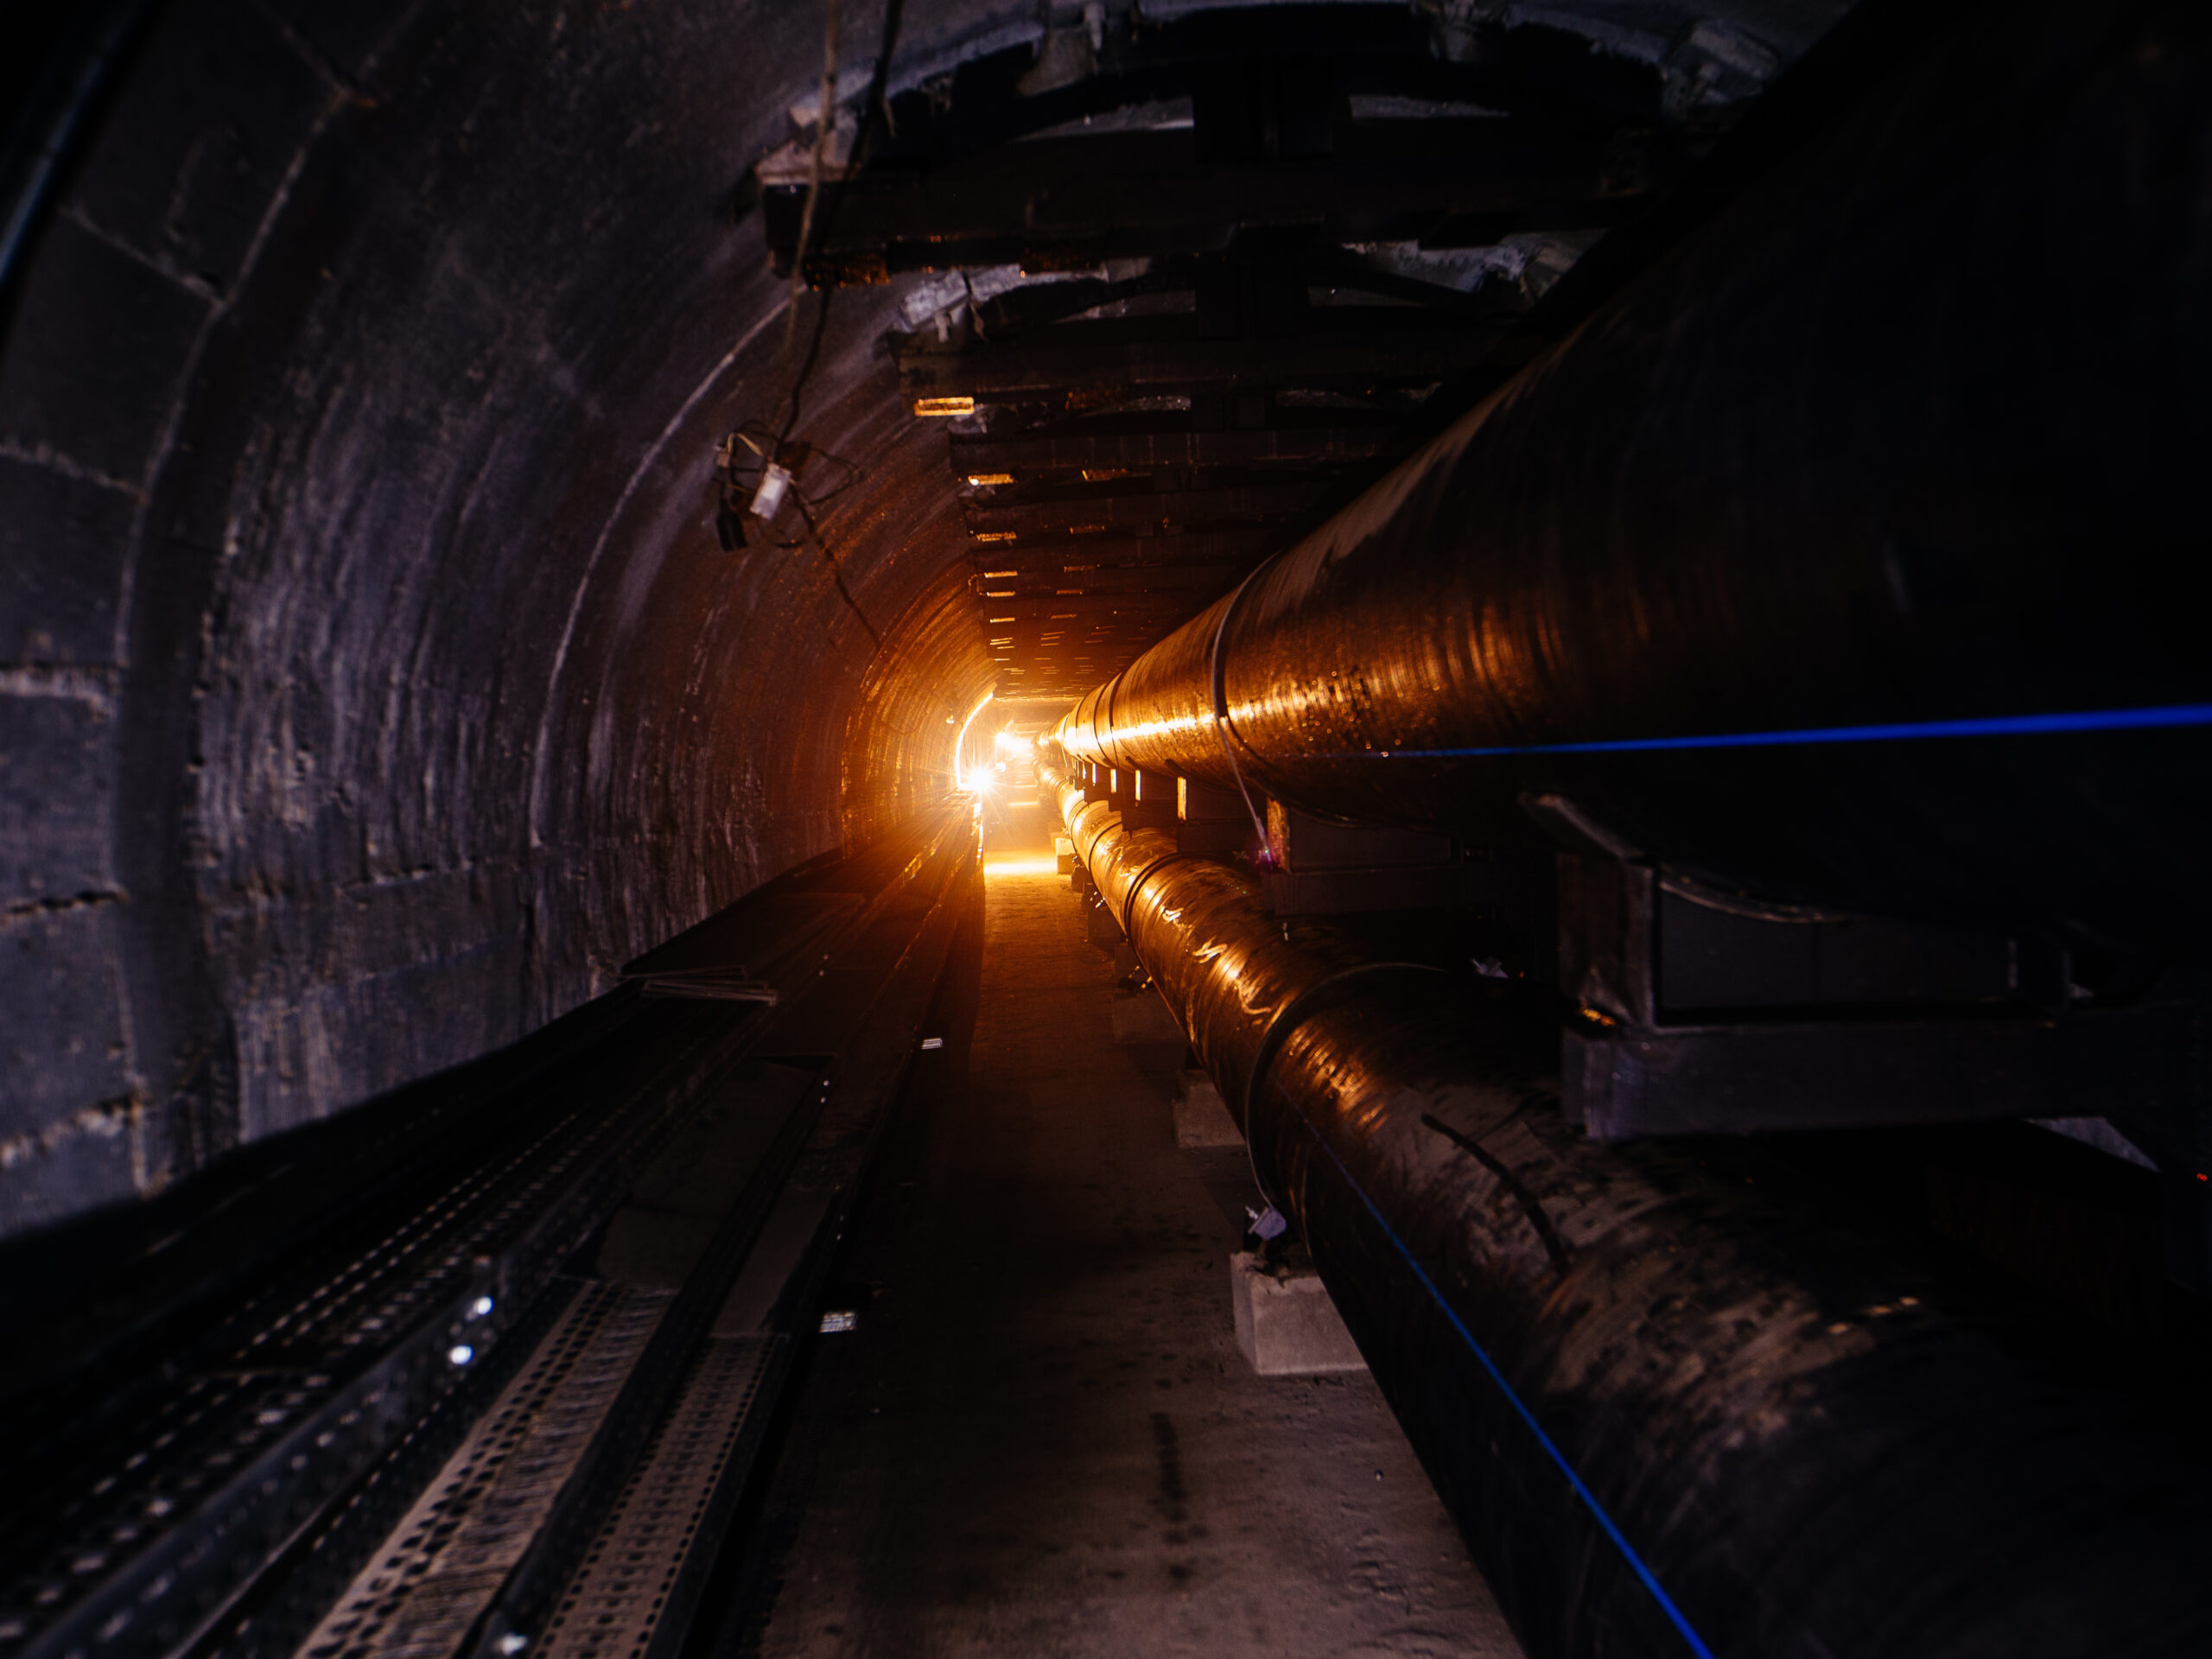 A light is shining up ahead onto an underground aqueduct and sewer system tunnel.